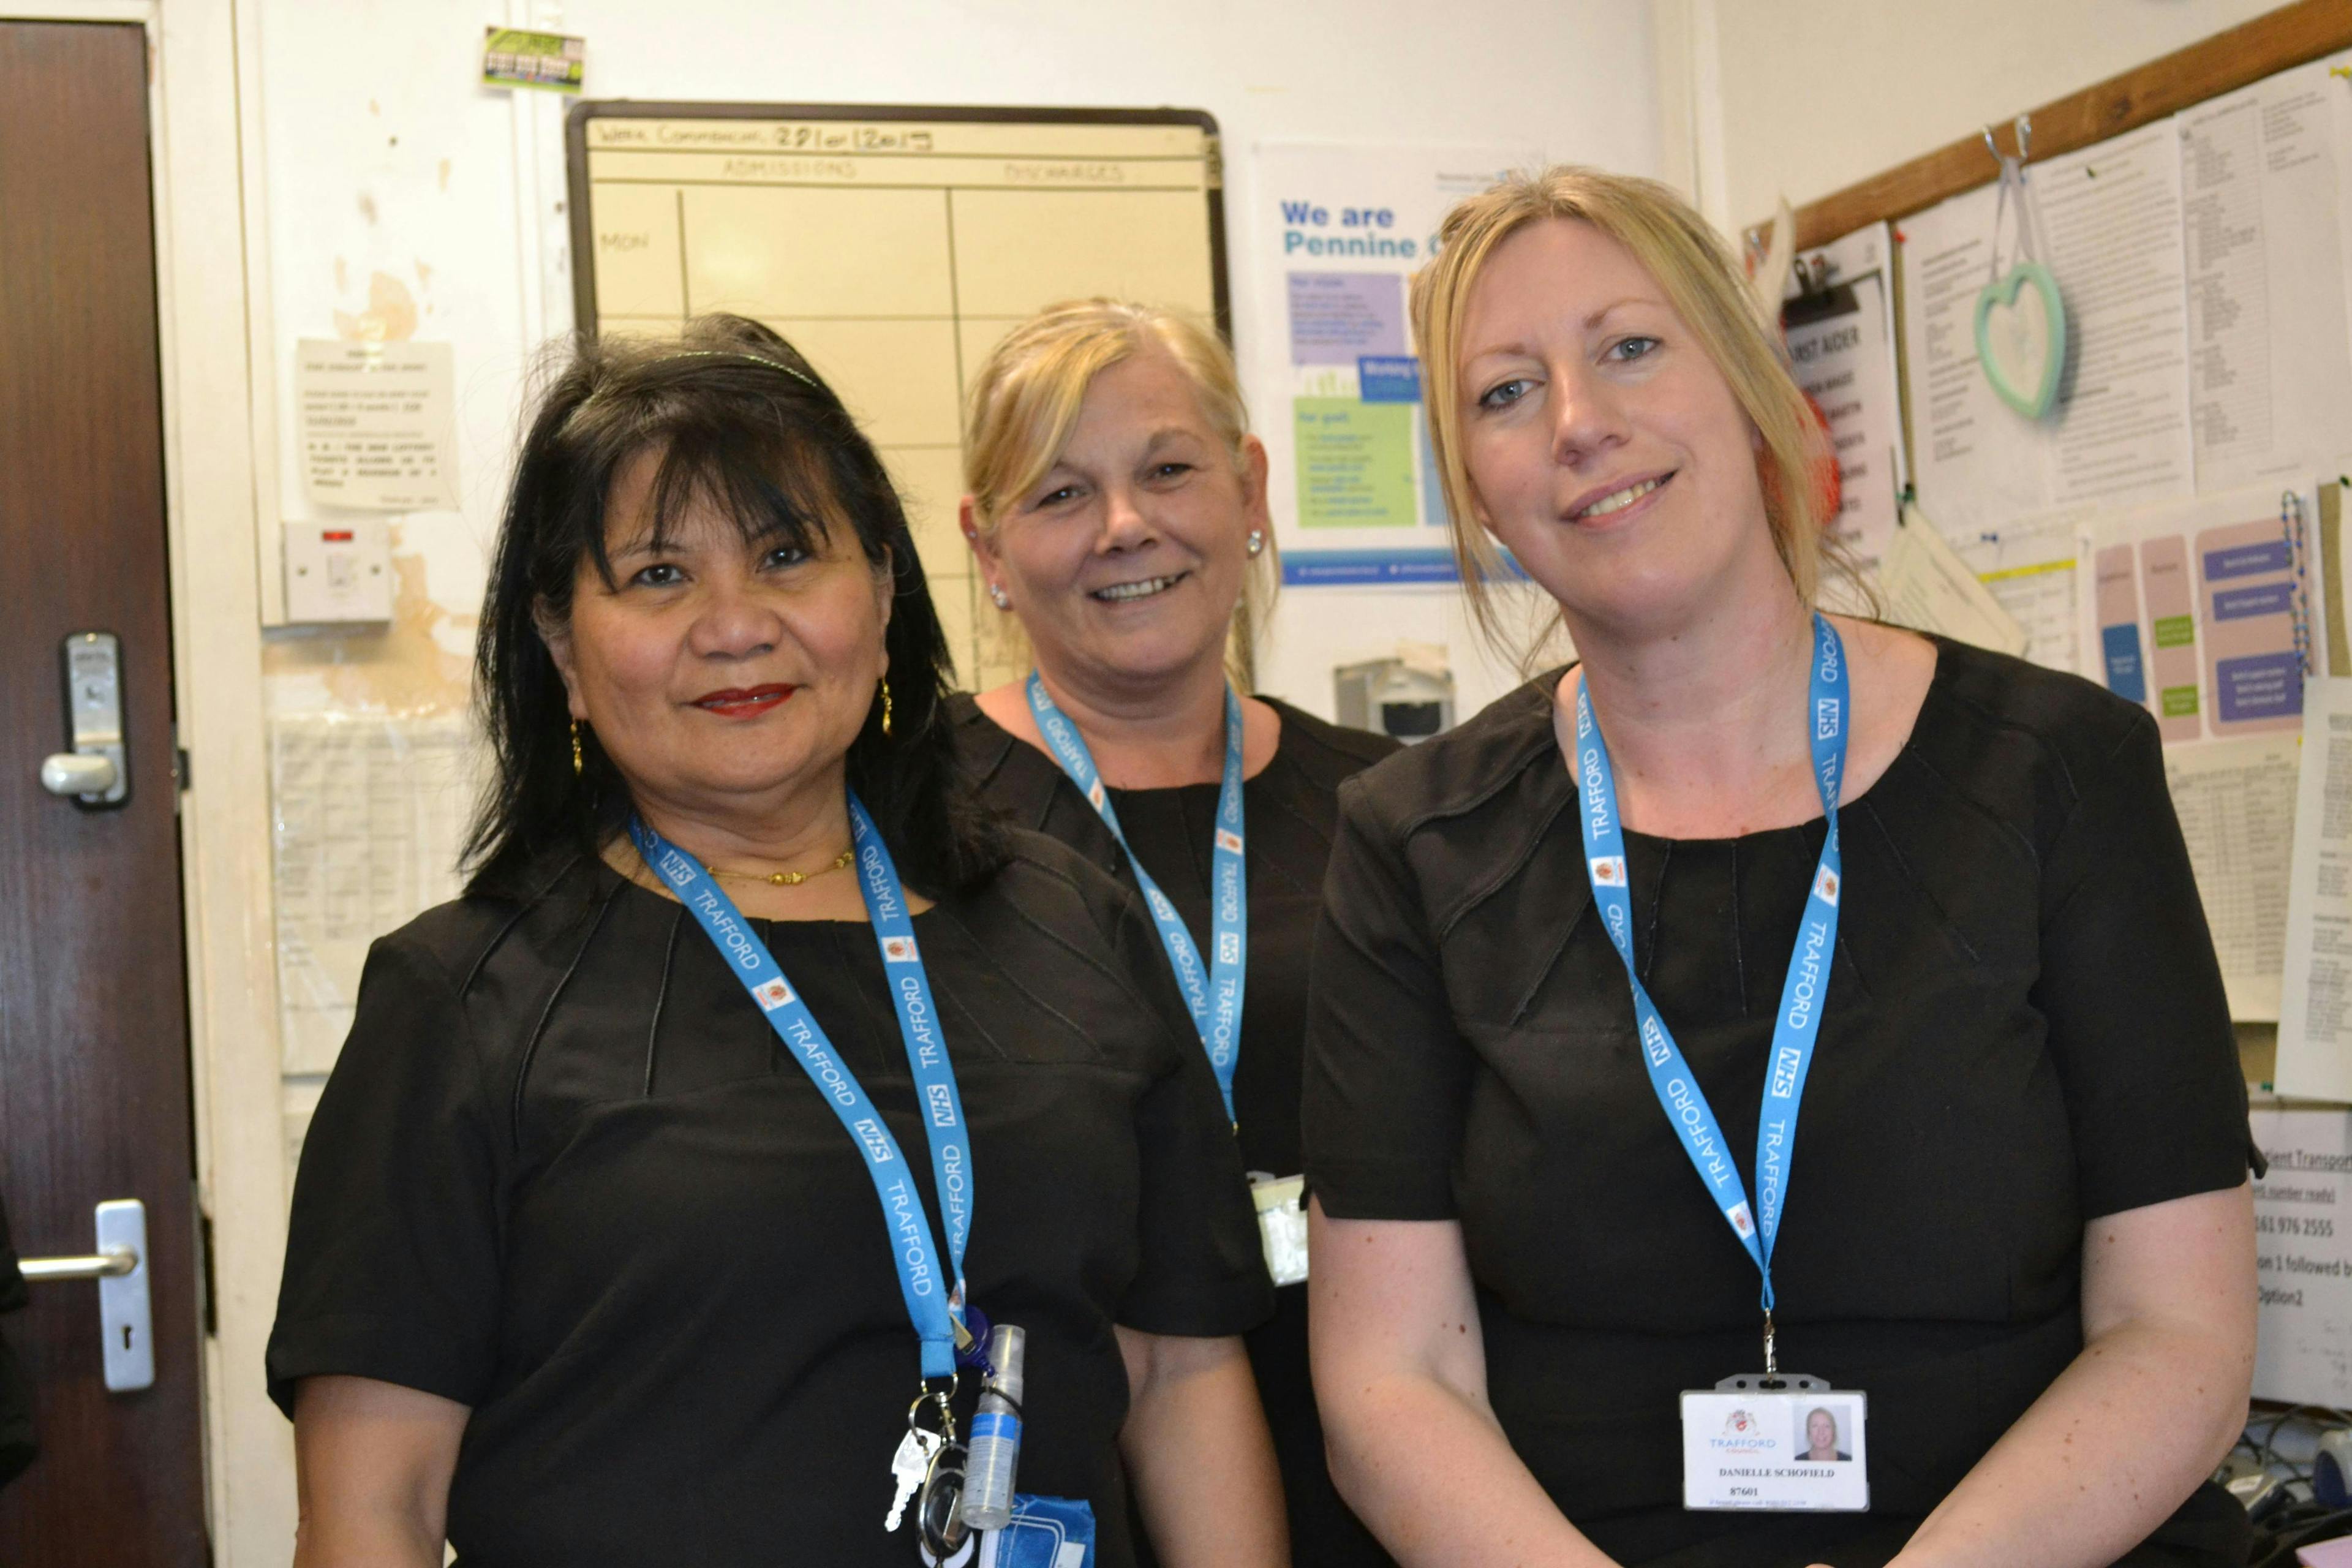 Three smiling ladies standing in an office, visible from the bust up. They wear blue ID badges. Behind them, a board on the wall holds papers, with a door in the background on the left side.